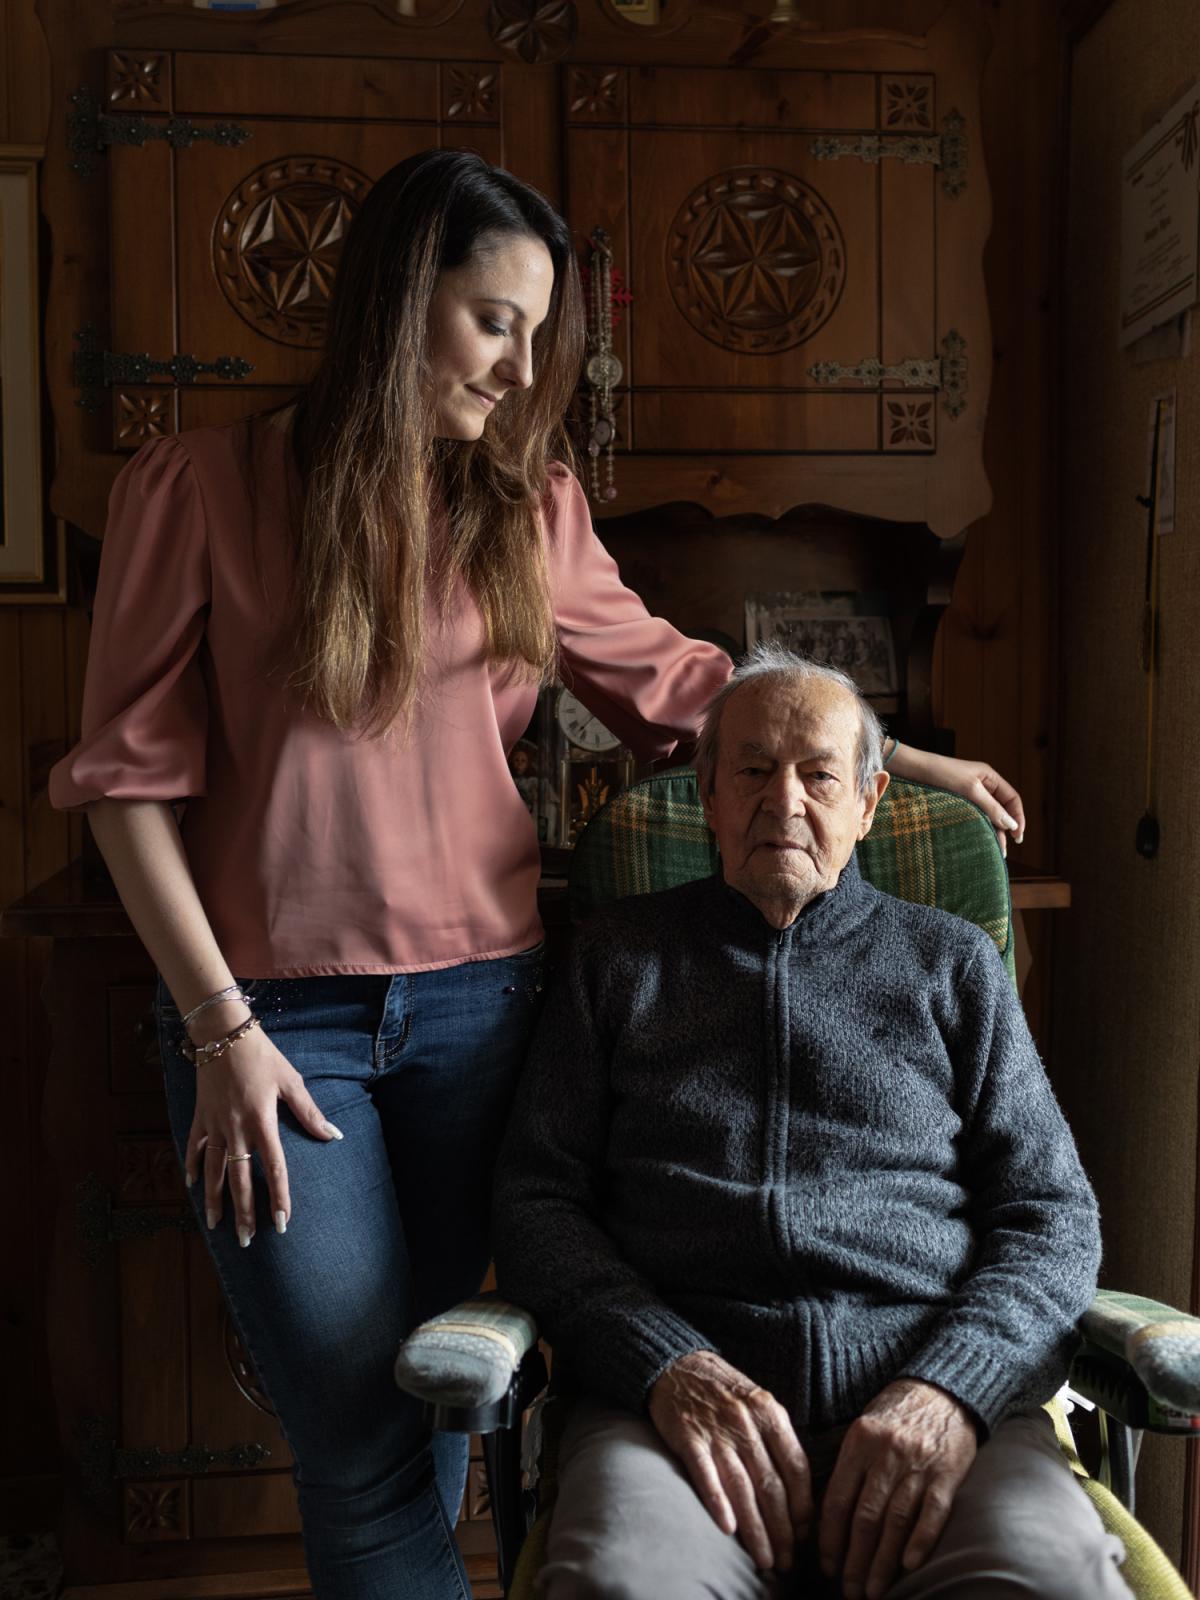 We are still dreaming  - Giorgio, born in 1927, with his 29-year-old niece Maria...